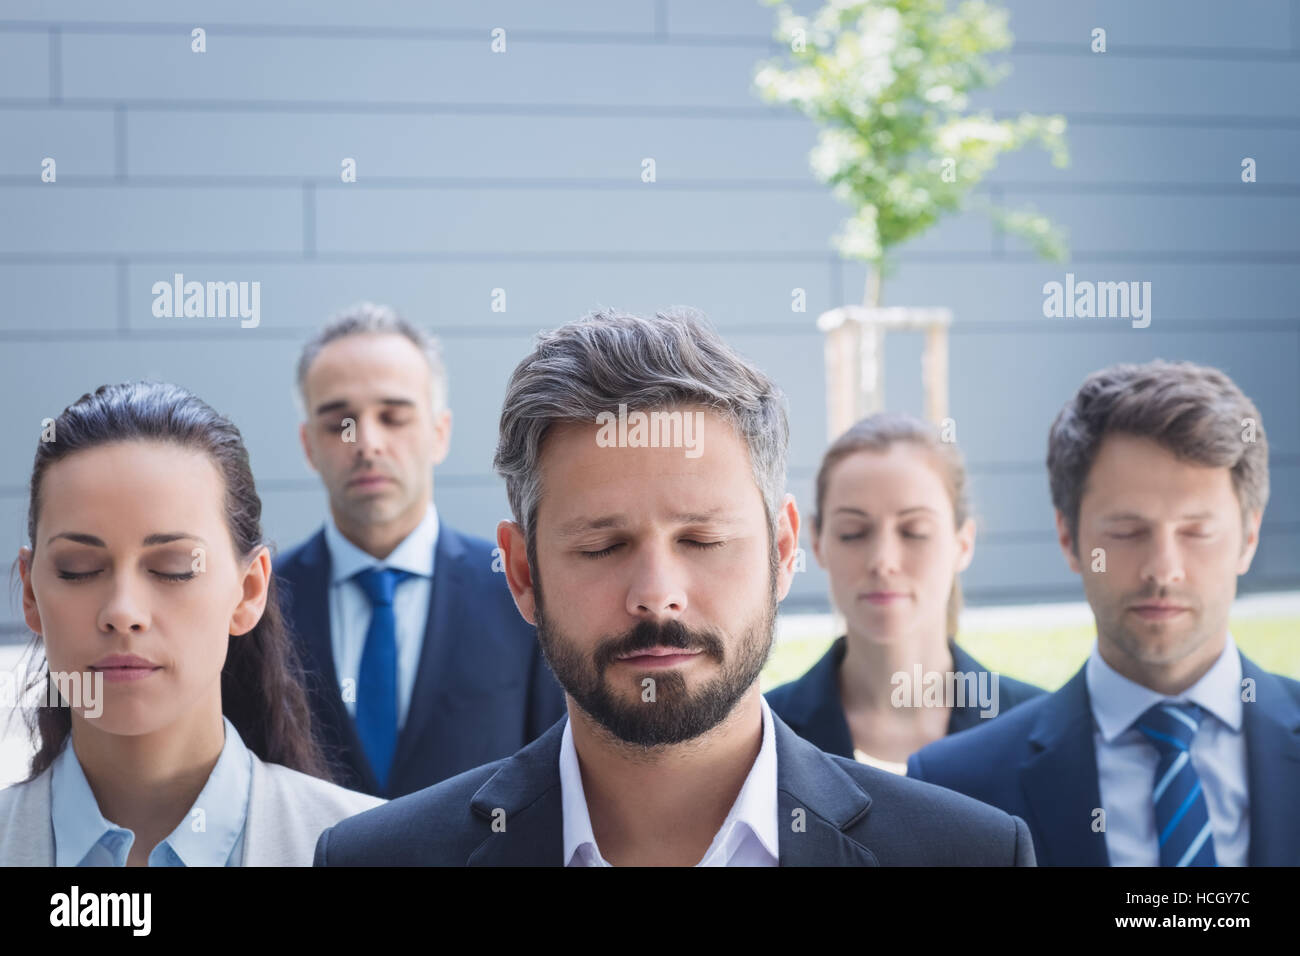 Group of business people with eyes closed Stock Photo